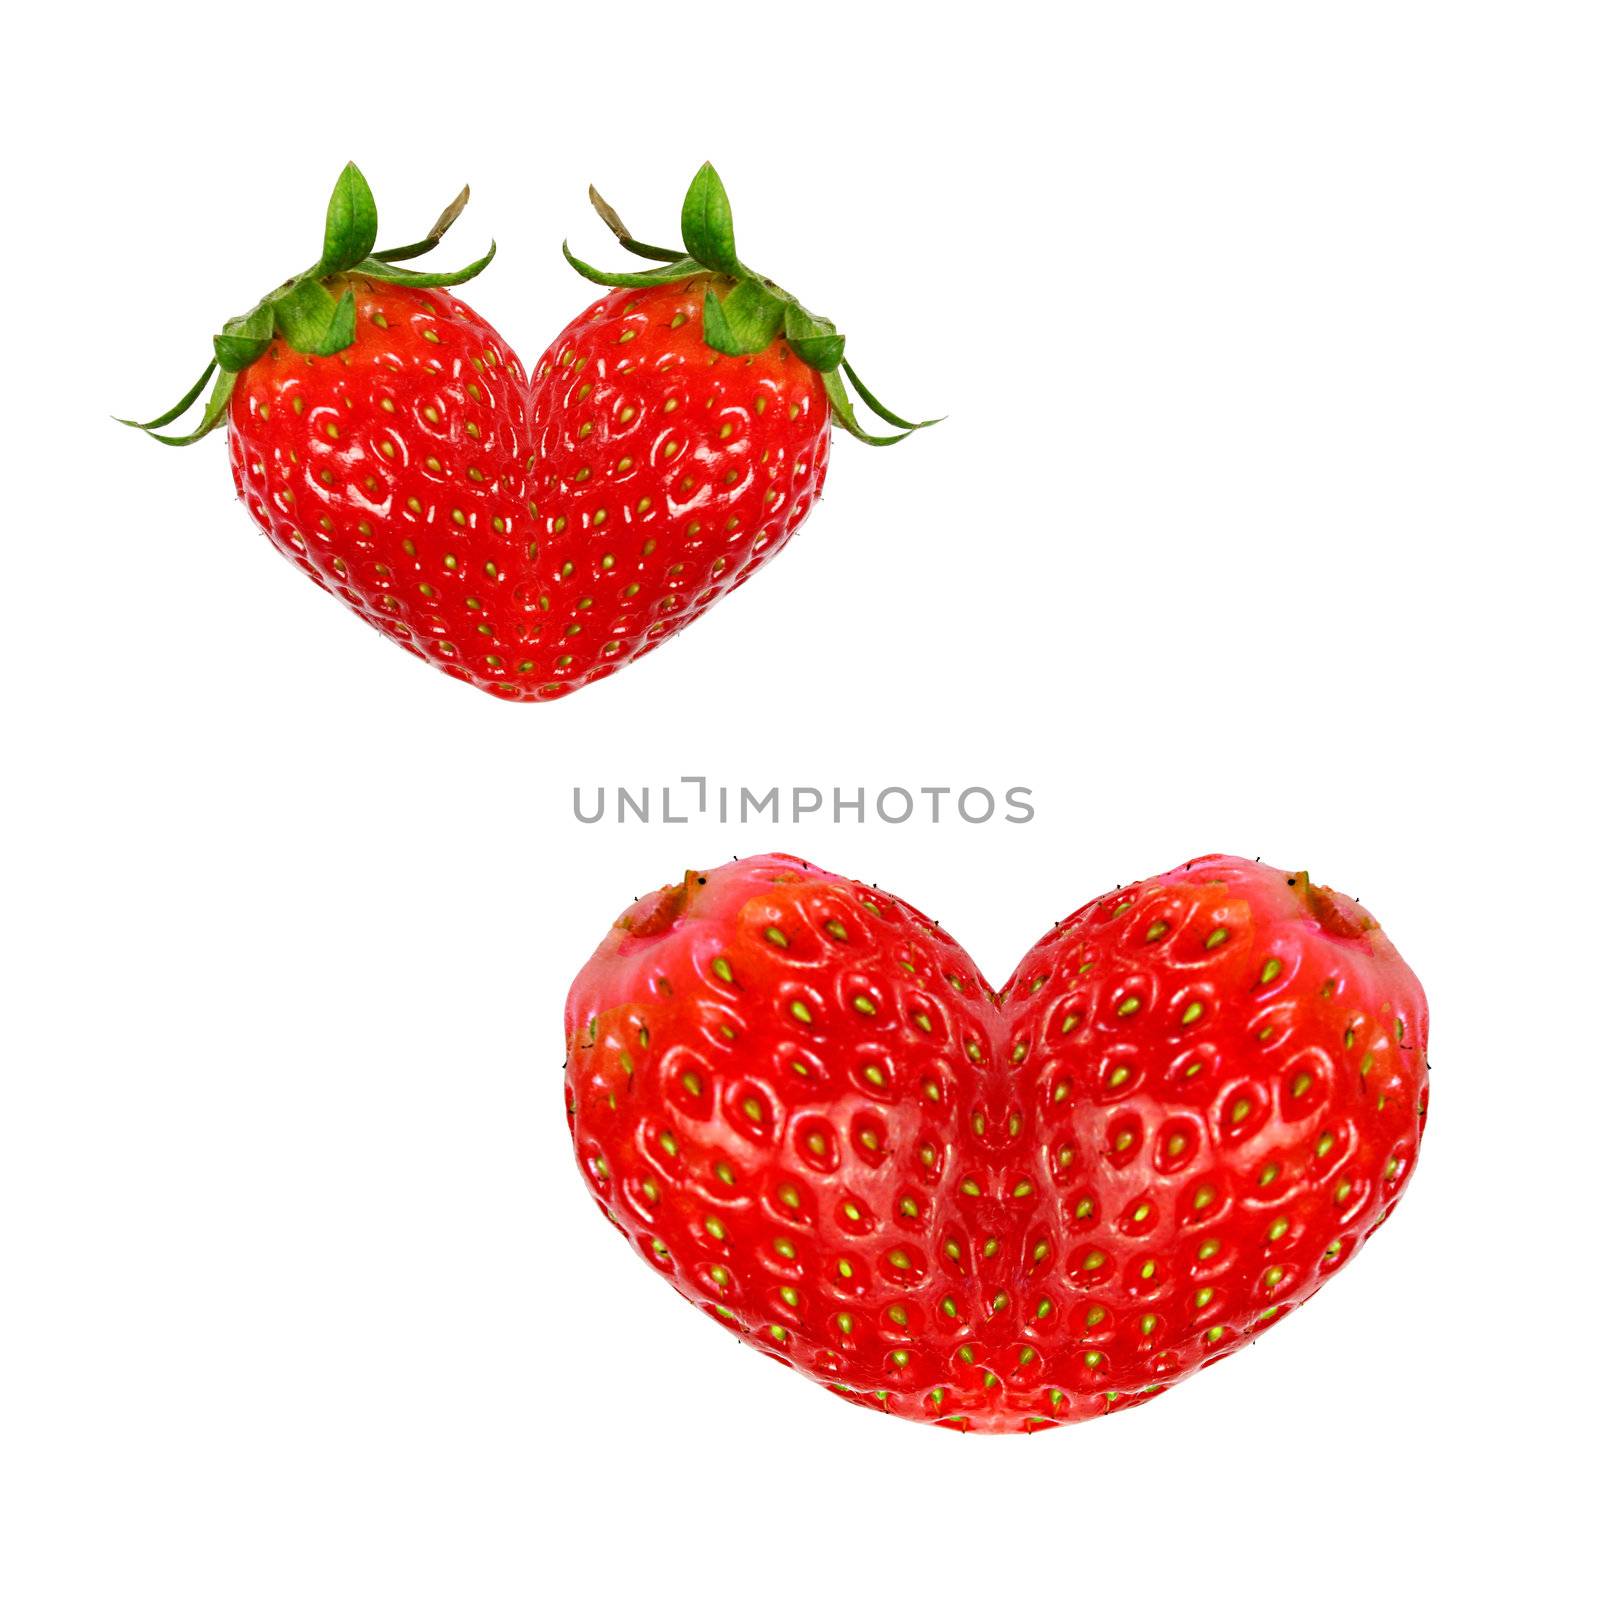 Two different heart-shaped Strawberries in white background